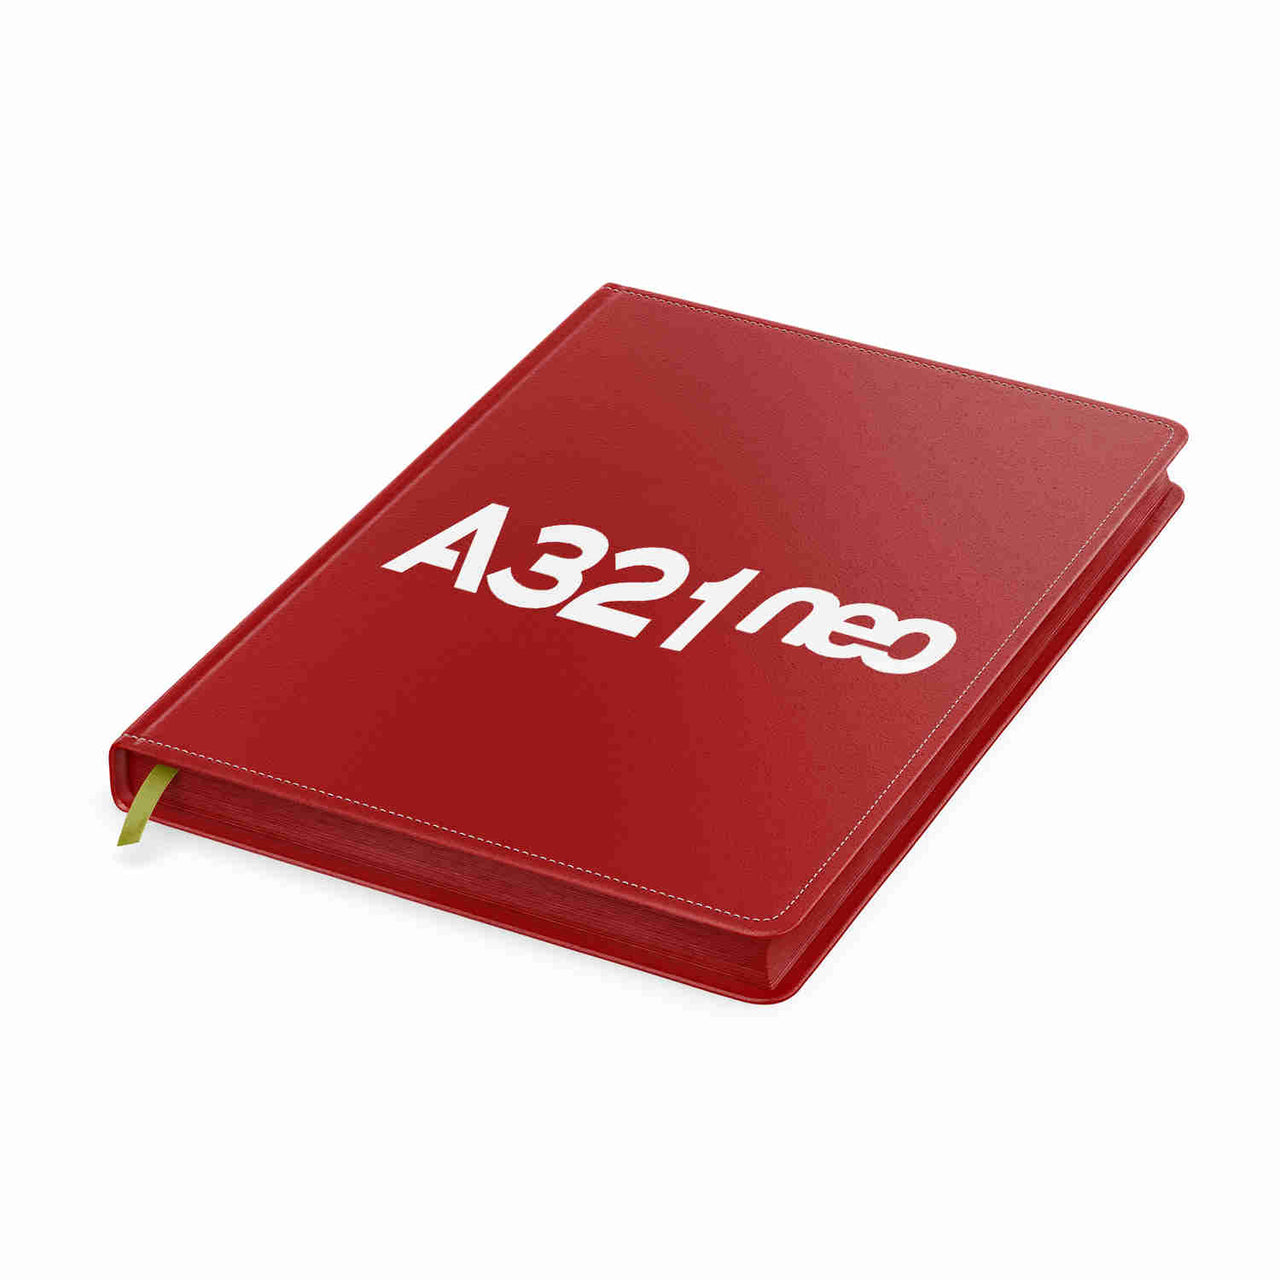 A321neo & Text Designed Notebooks